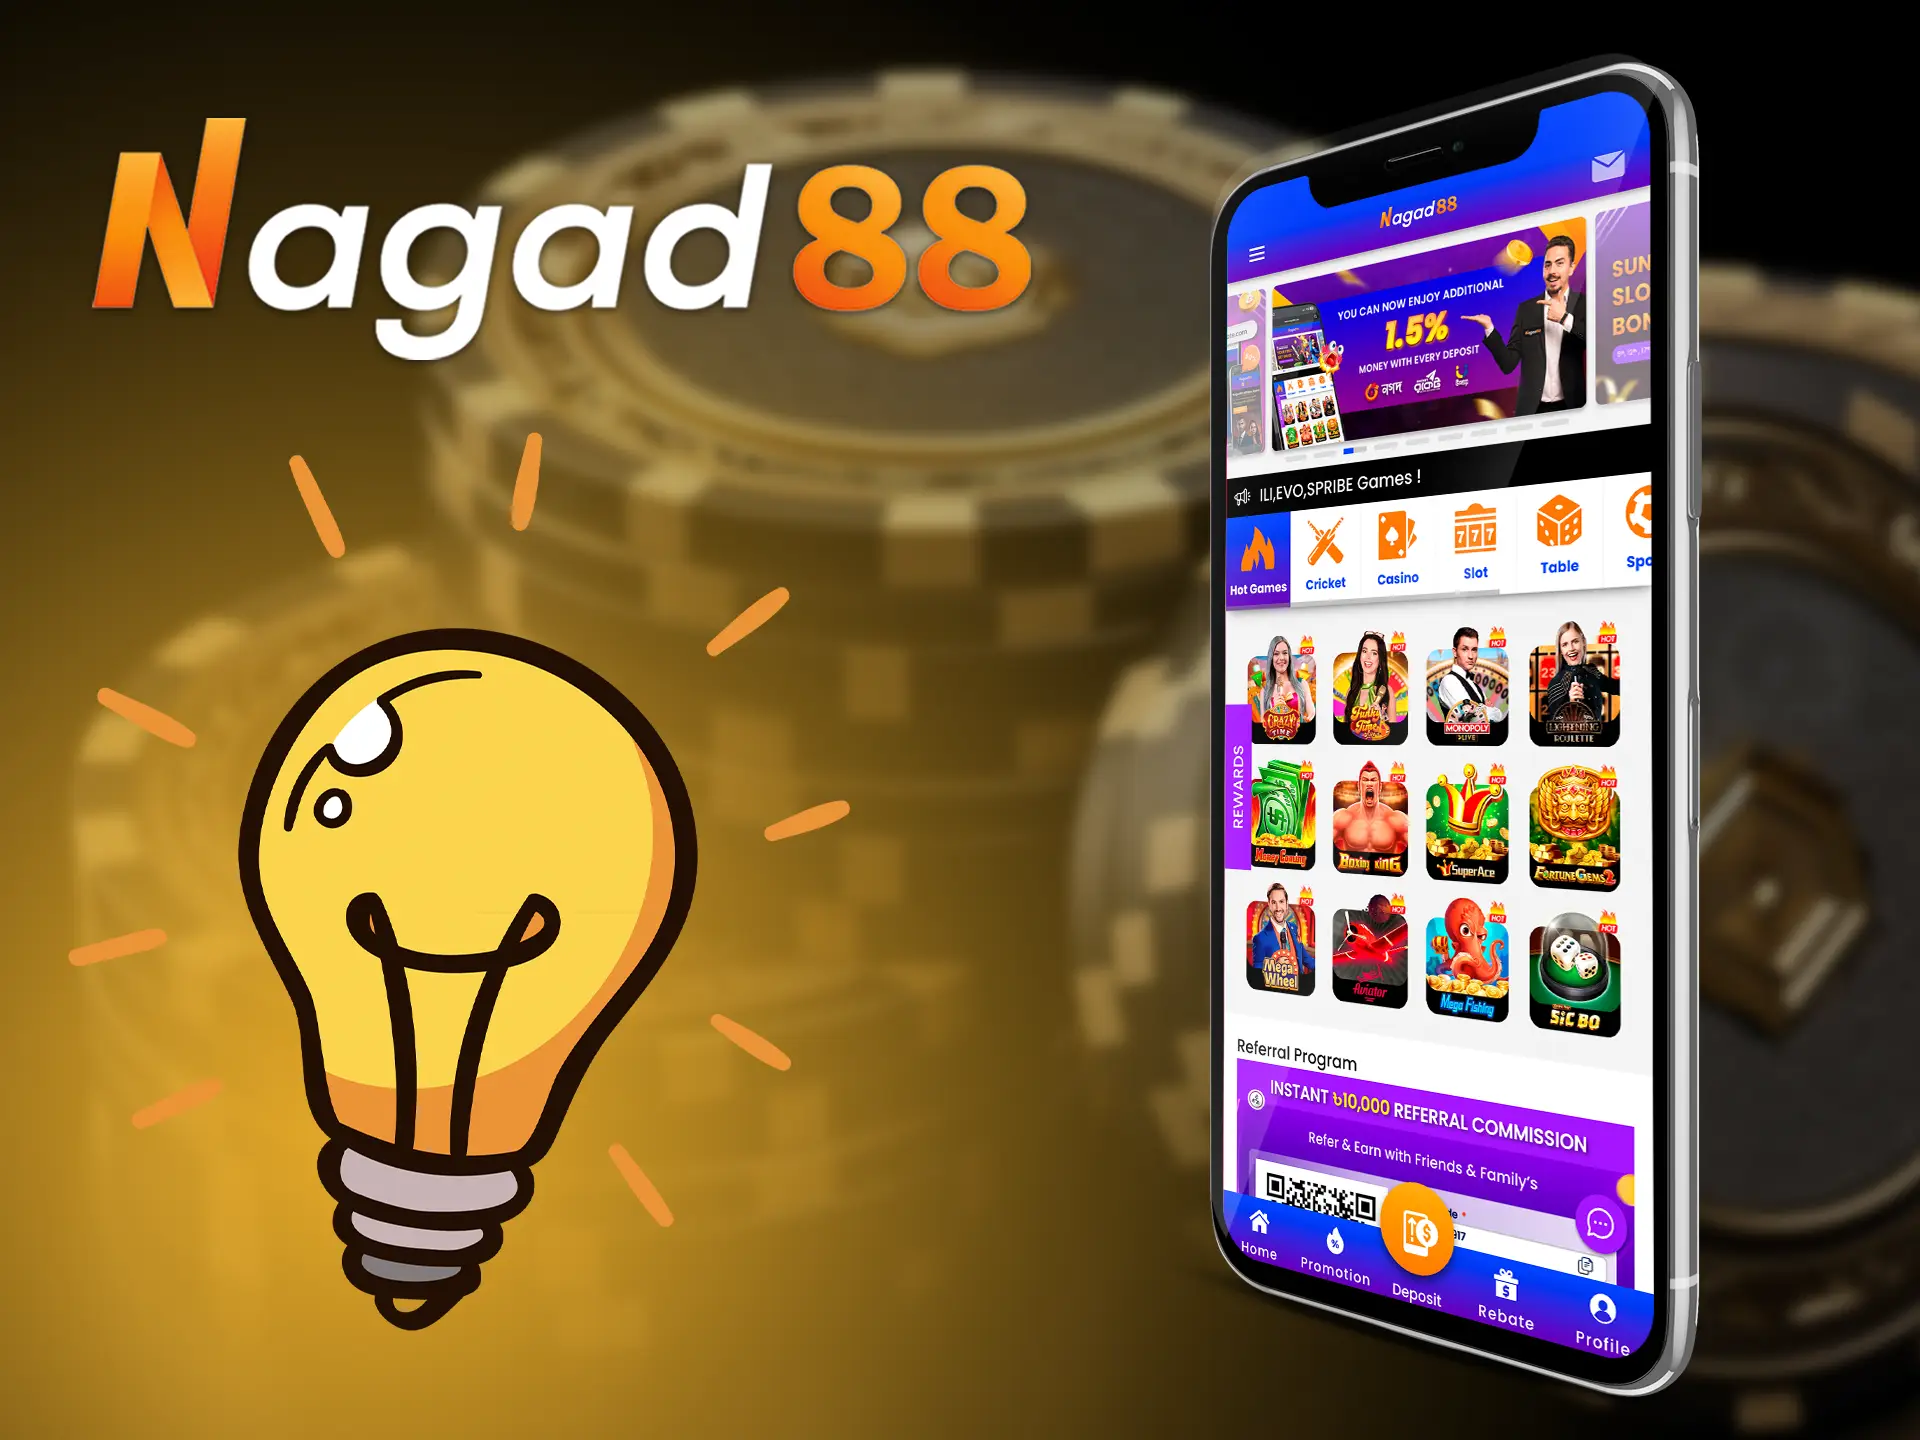 Find out what subspecies of casinos exist on the Nagad88 platform.